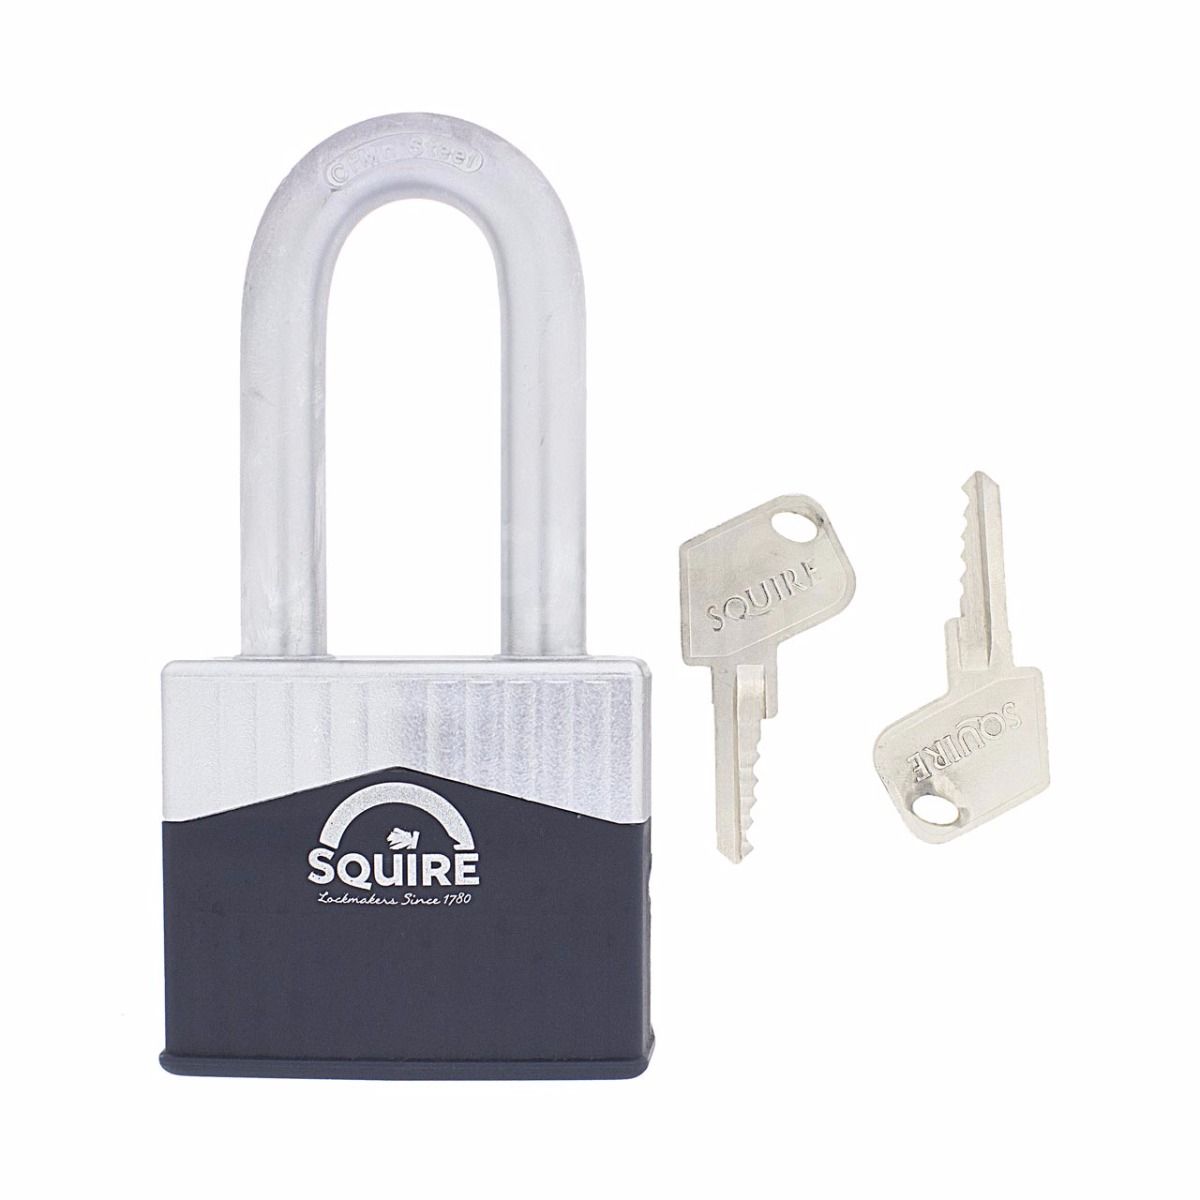 Dimensions Image: SQUIRE Warrior WAR65 - 63mm Long Shackle Padlock